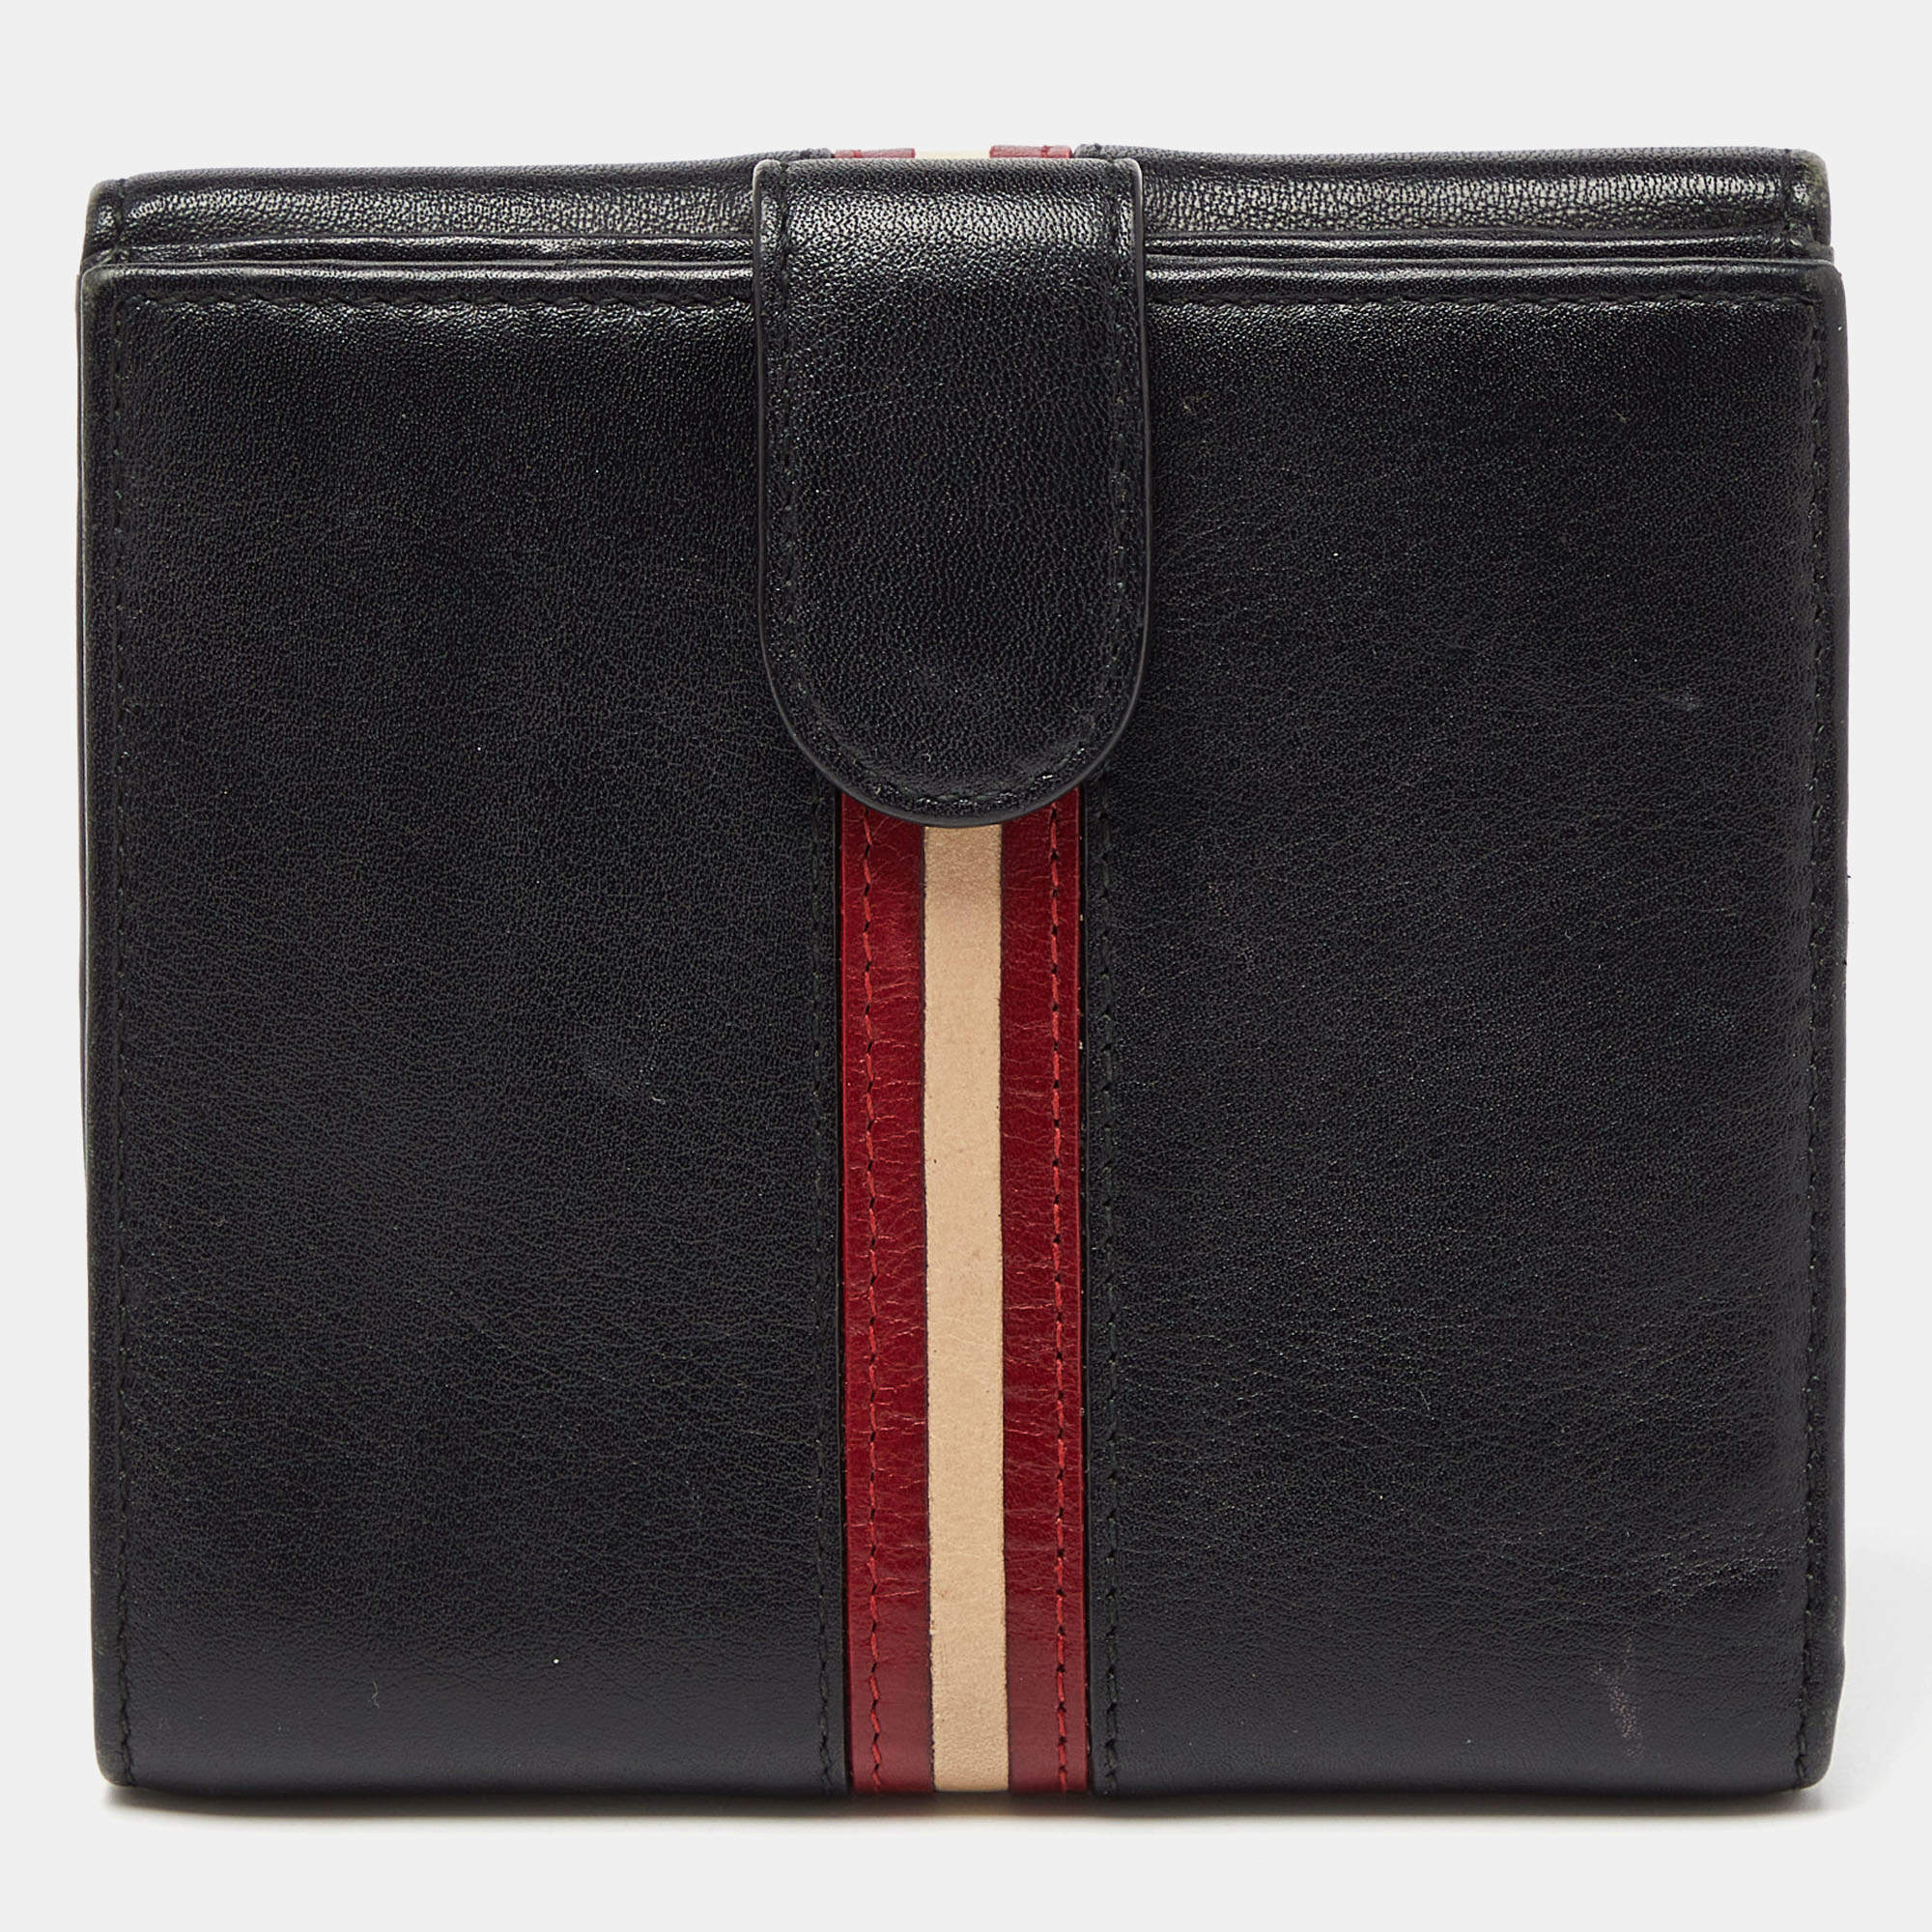 Bally Black Leather Compact Wallet